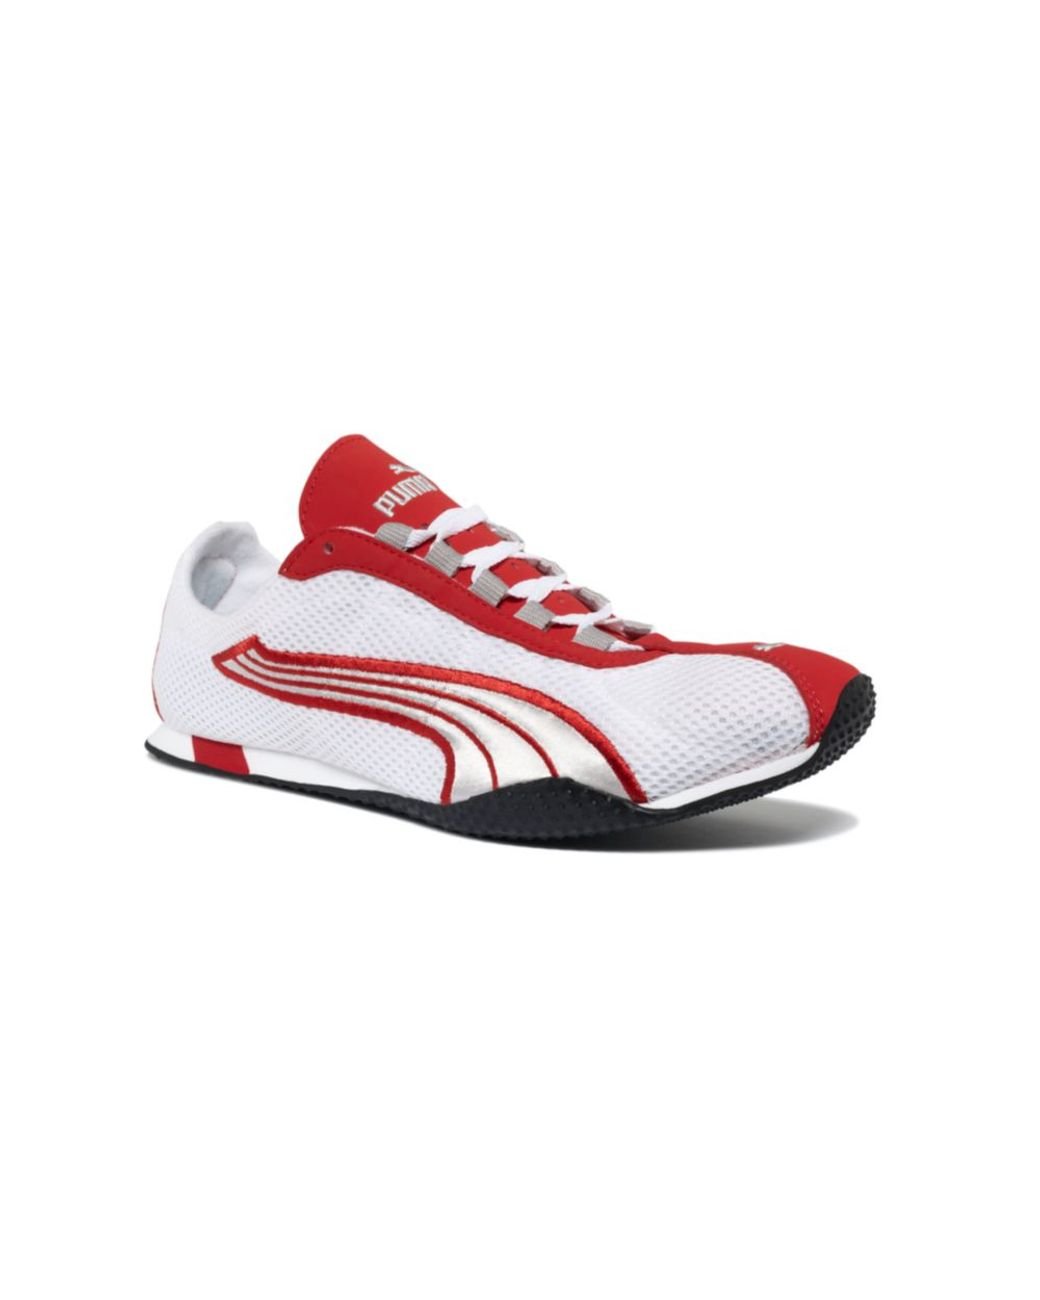 PUMA H Street Sneakers in White/Silver/Red (White) for Men | Lyst